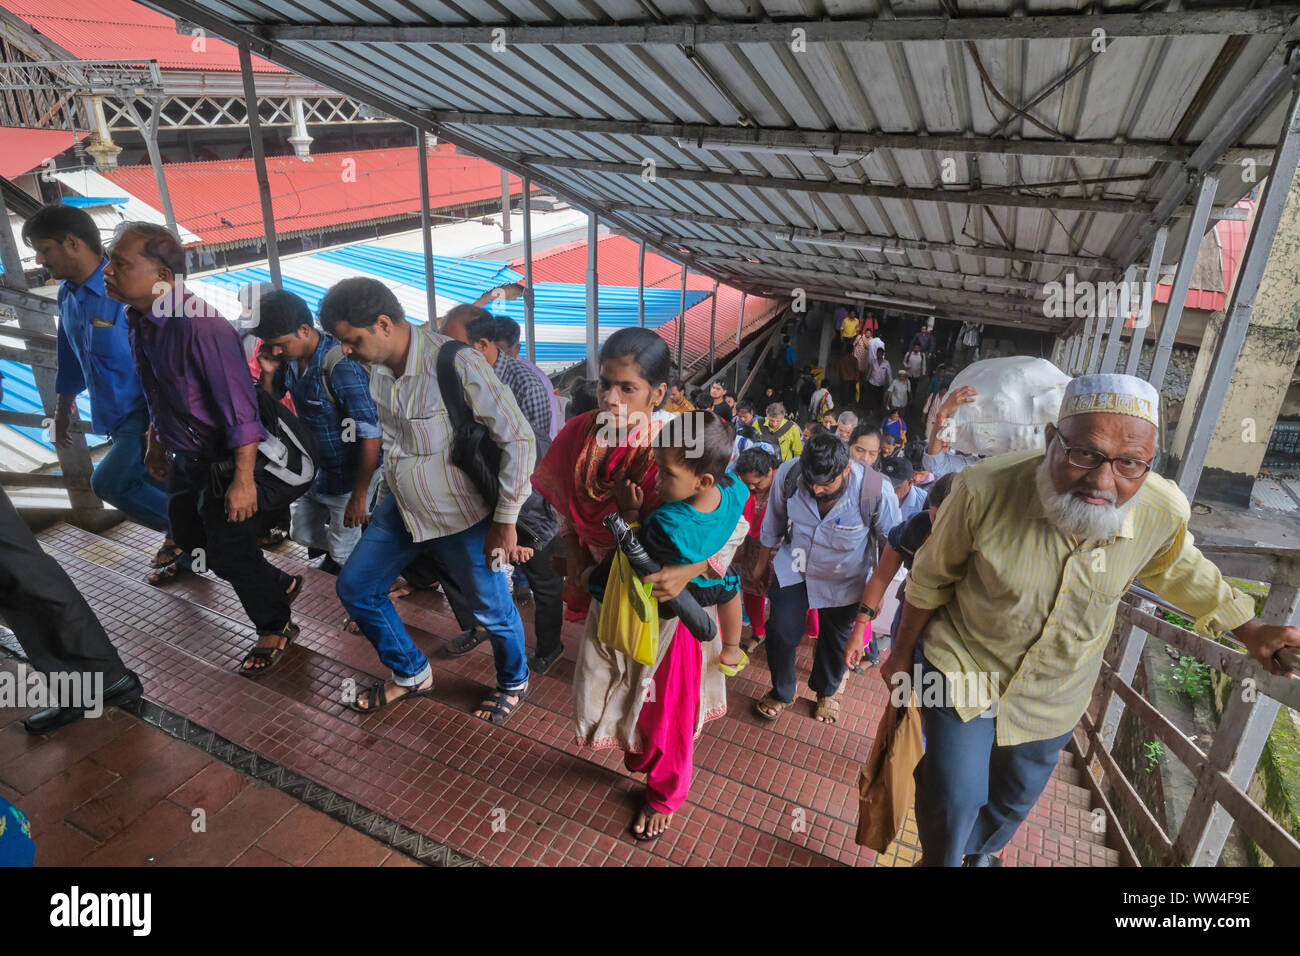 Passengers of local trains at Byculla Station in Mumbai, India, crossing over a bridge across the rail platforms Stock Photo